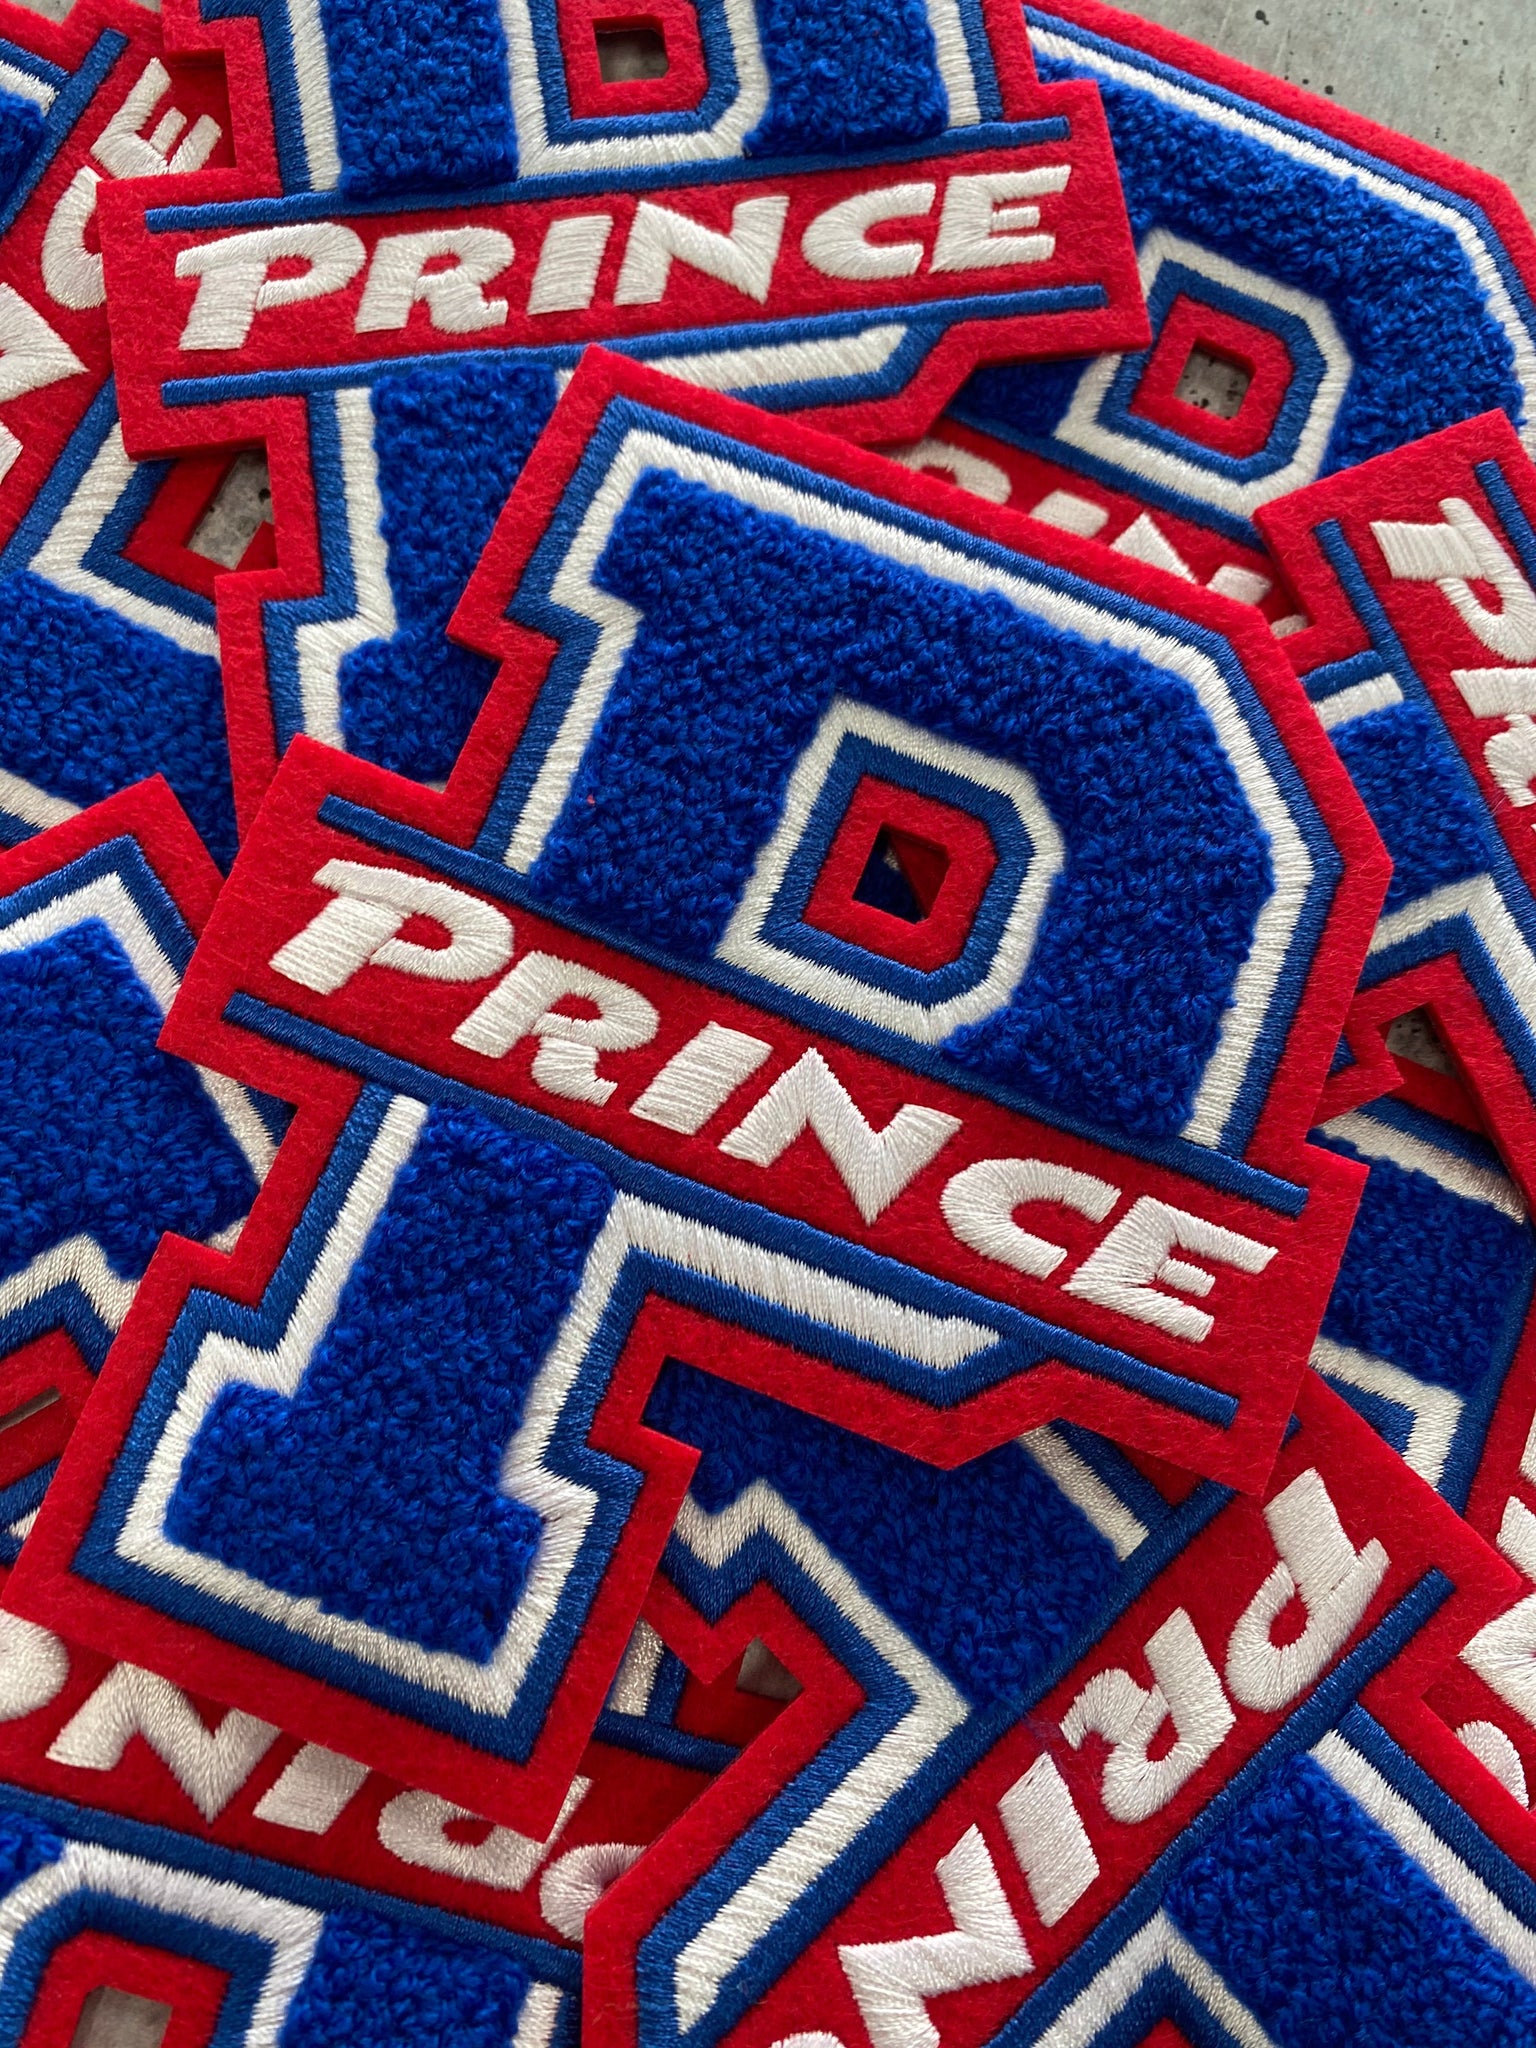 Black-History-Sale Monogram Letter, "P" Embroidered Word PRINCE, Blue, Red, White, Size 6", Iron-on Backing, Medium Applique, Varsity